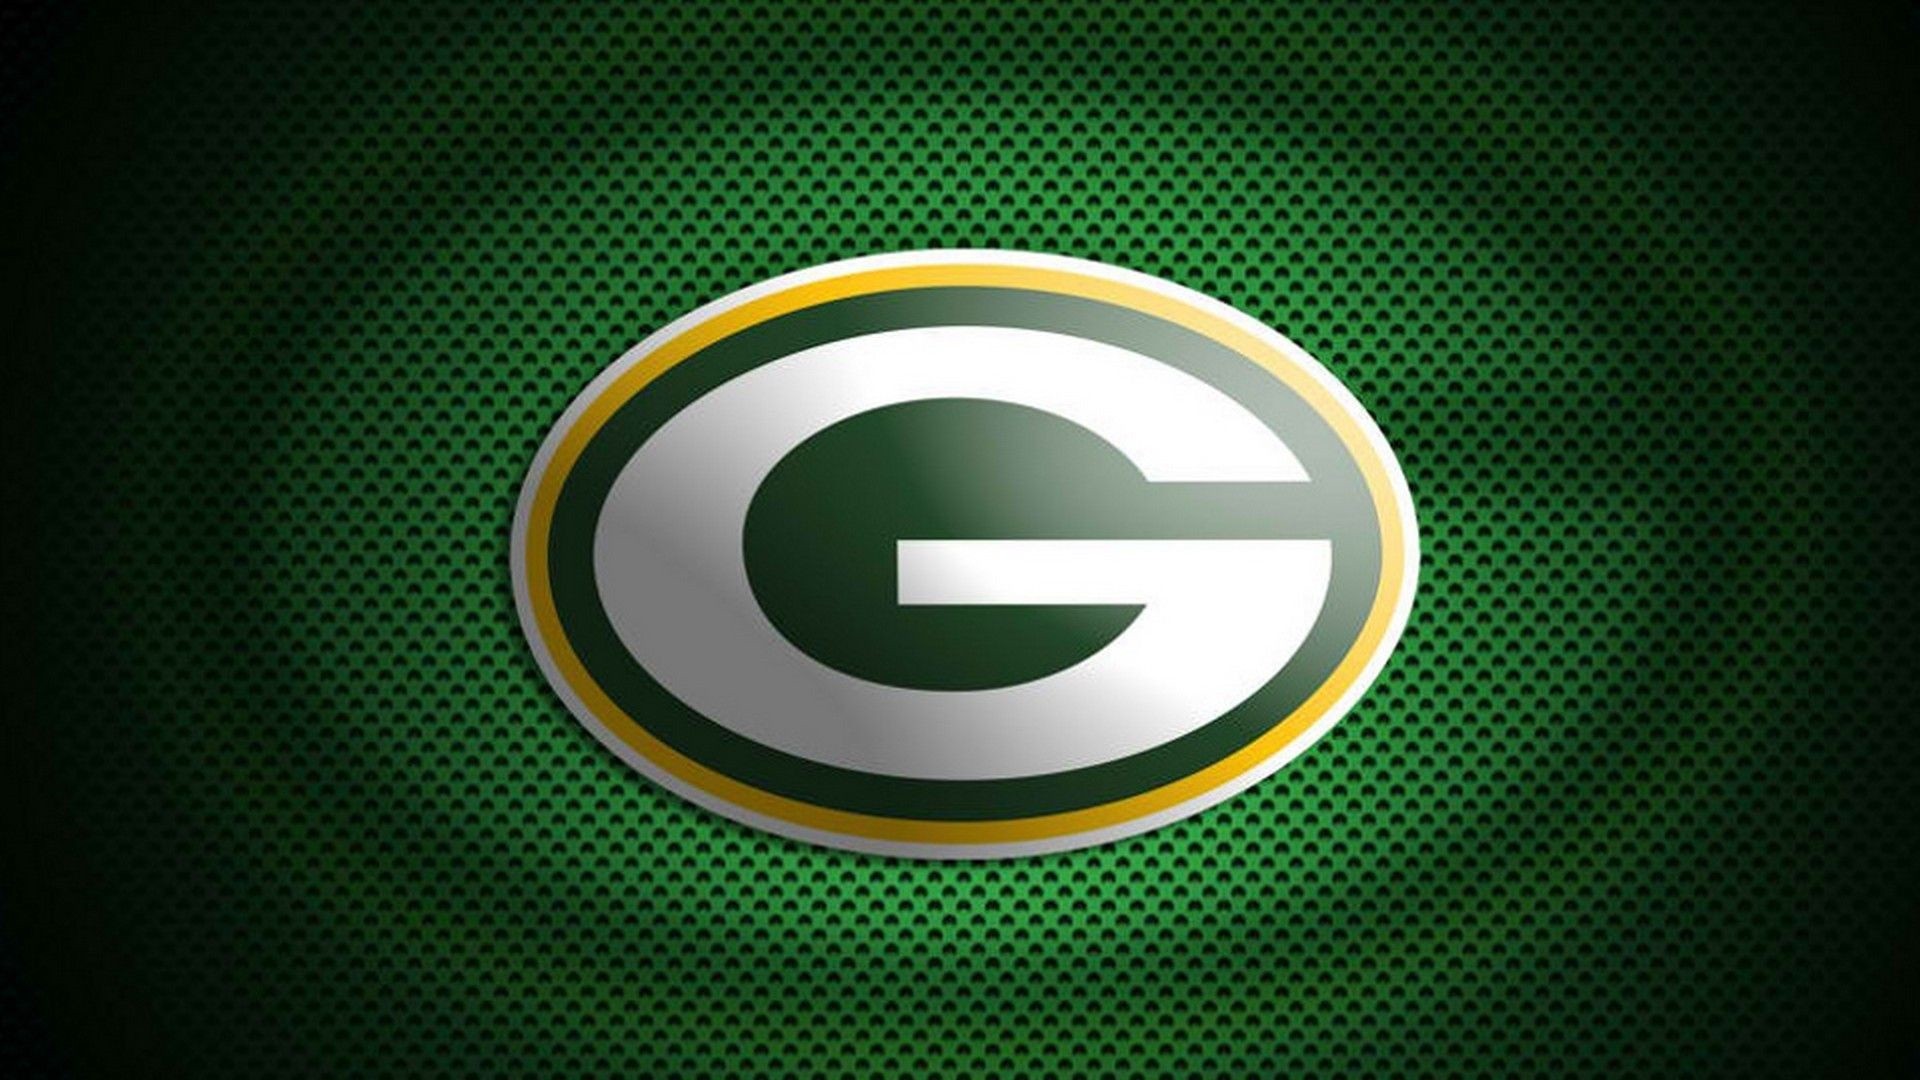 Green Bay Packers Image